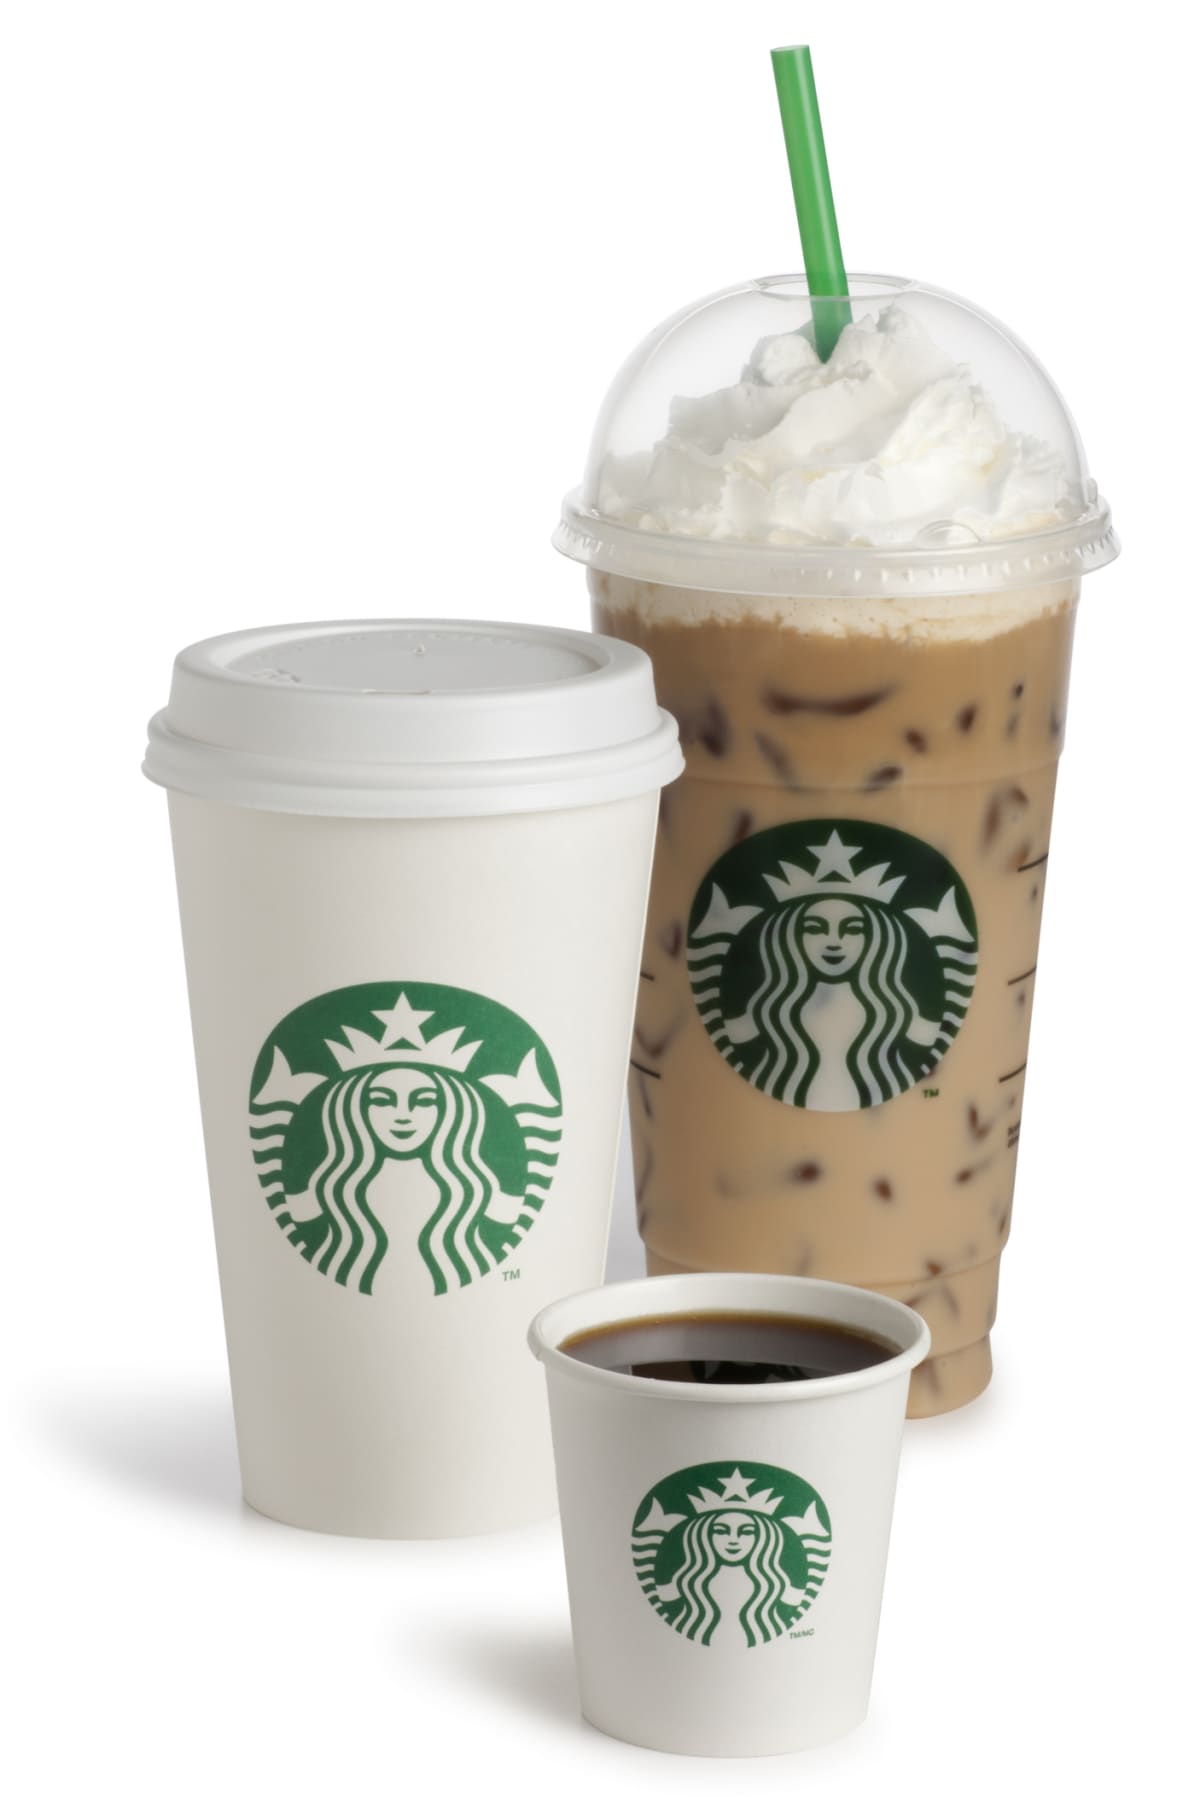 Thee different sizes of Starbucks drinks